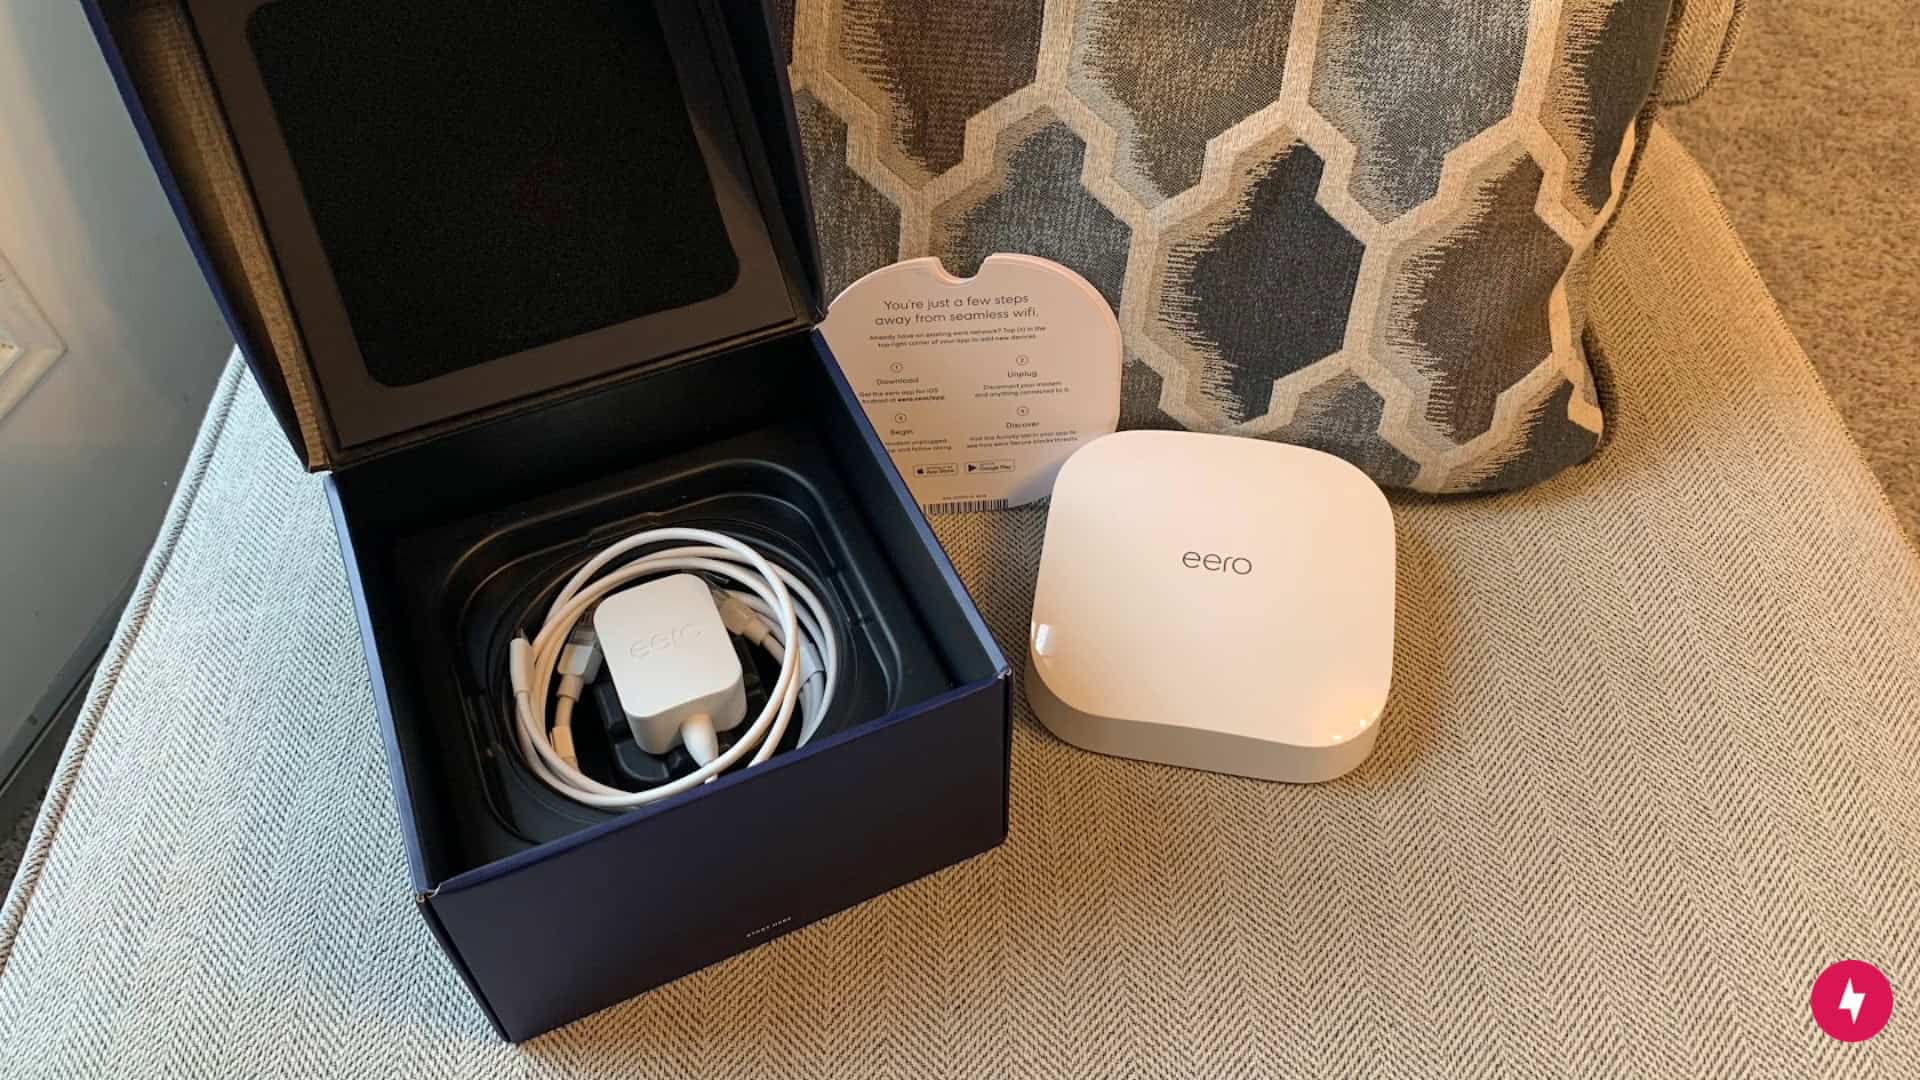 An open box of cords, instructions, and an Eero device.